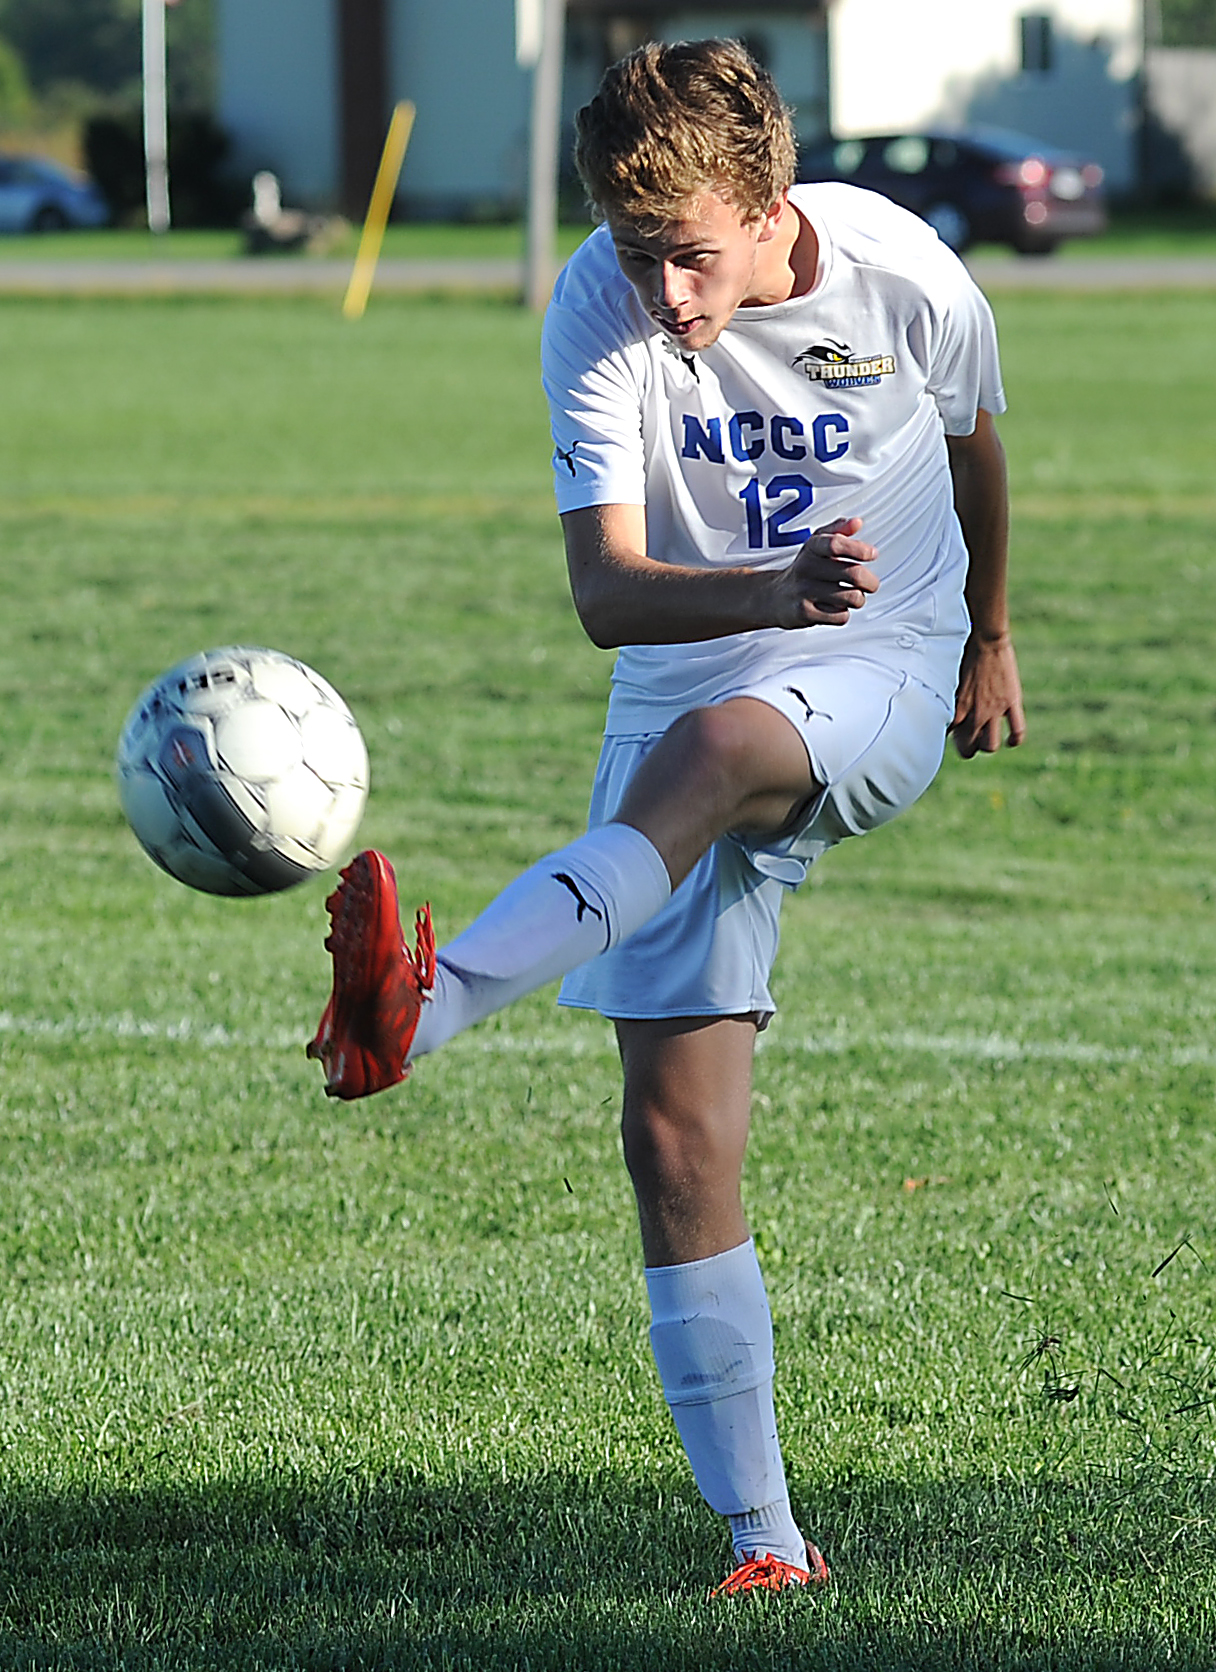 NCCC doubled up by CCBC Catonsville in opener